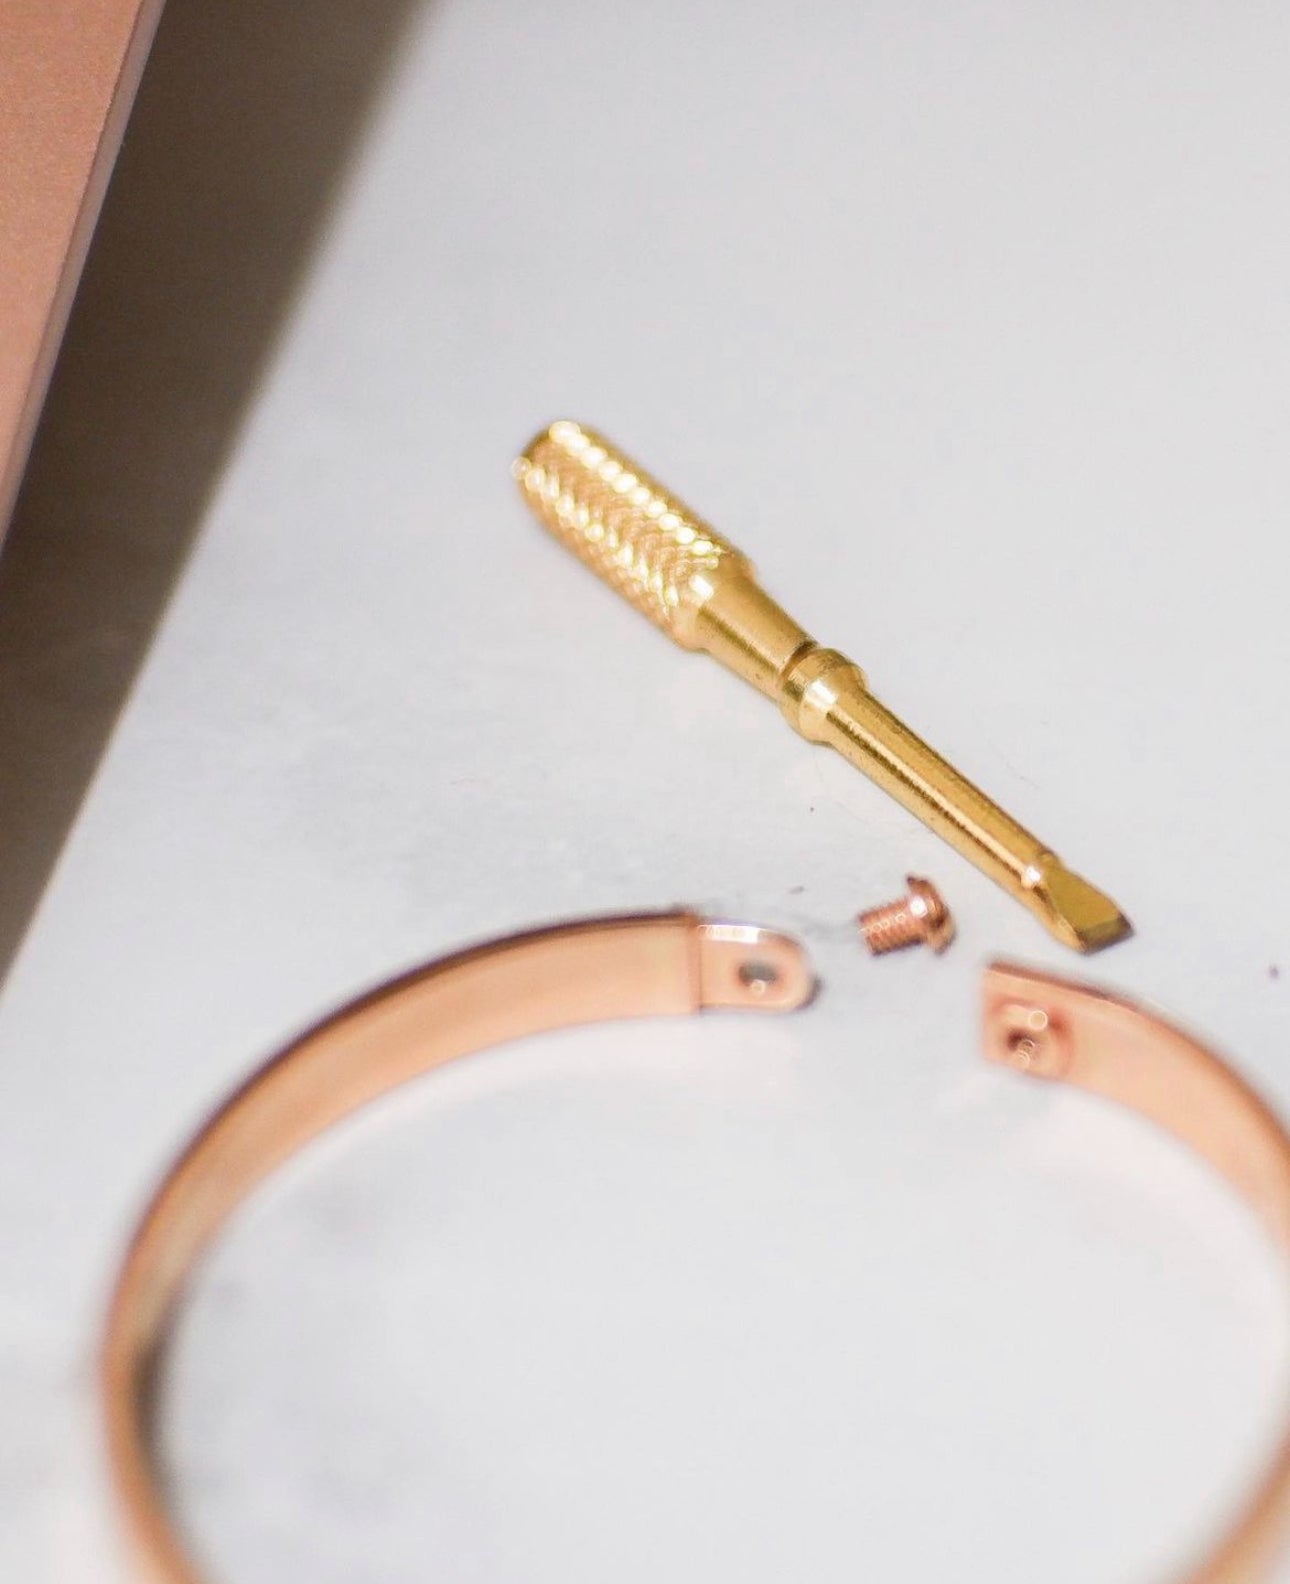 The Screw Lock 15cm Bangle in Solid Gold